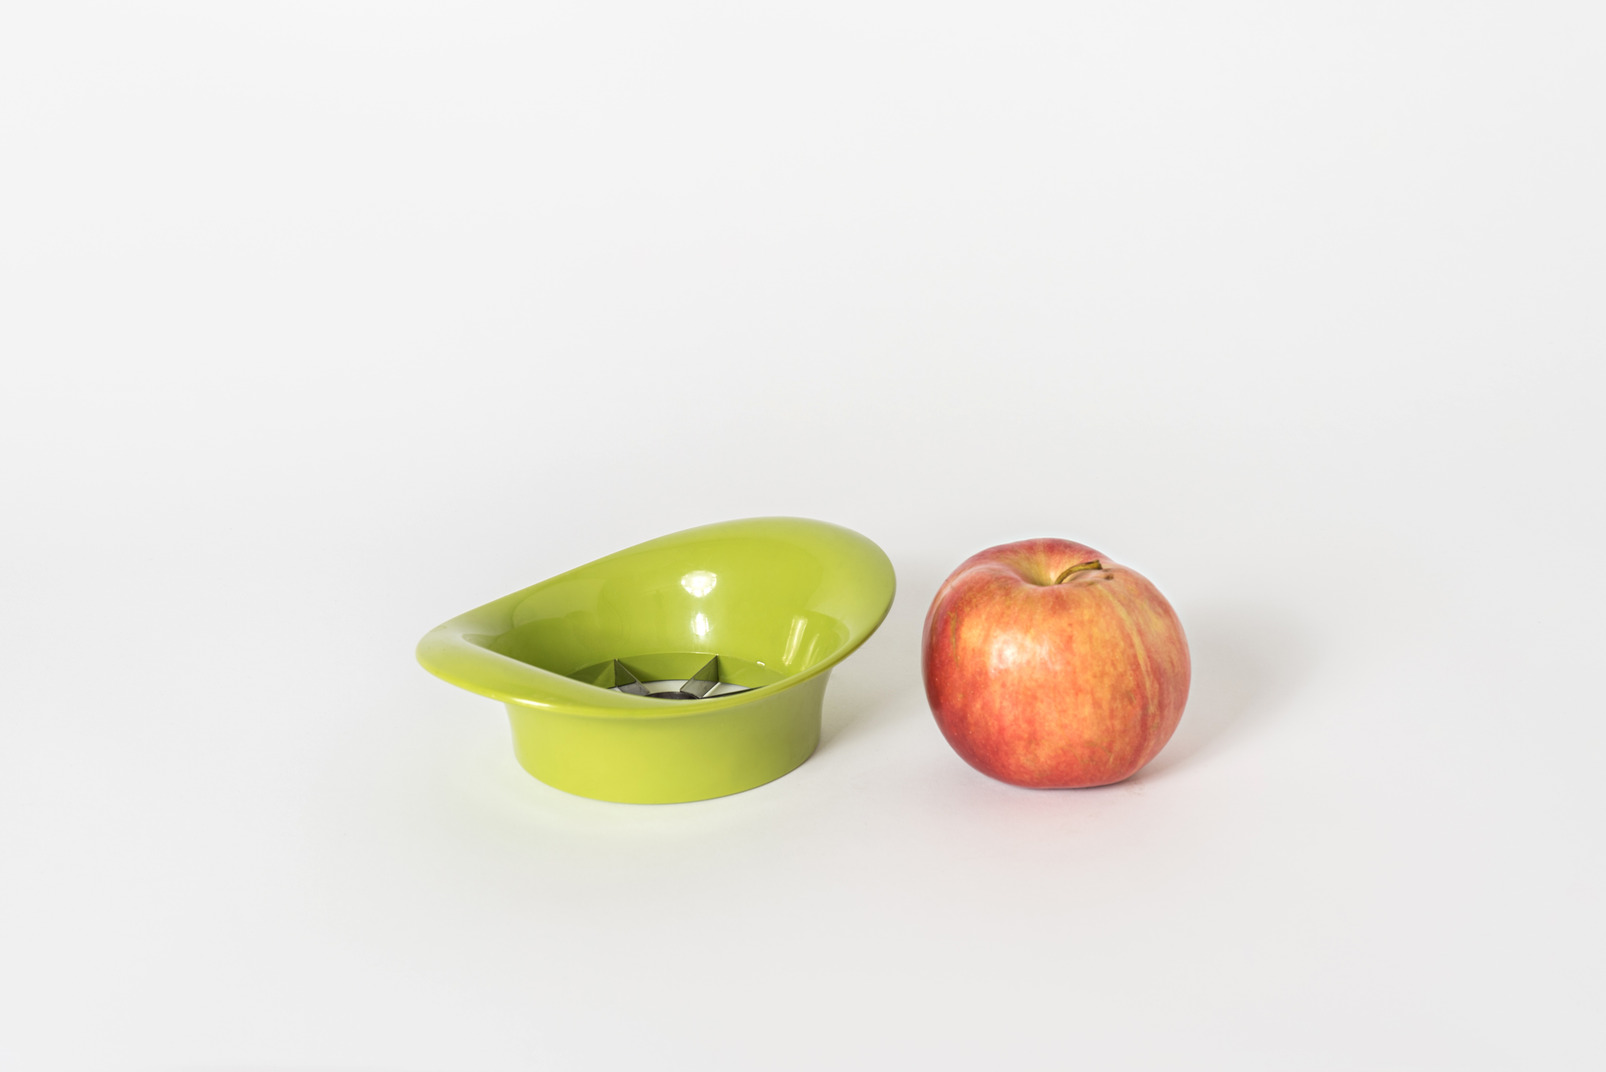 Apple and apple cutter on white background